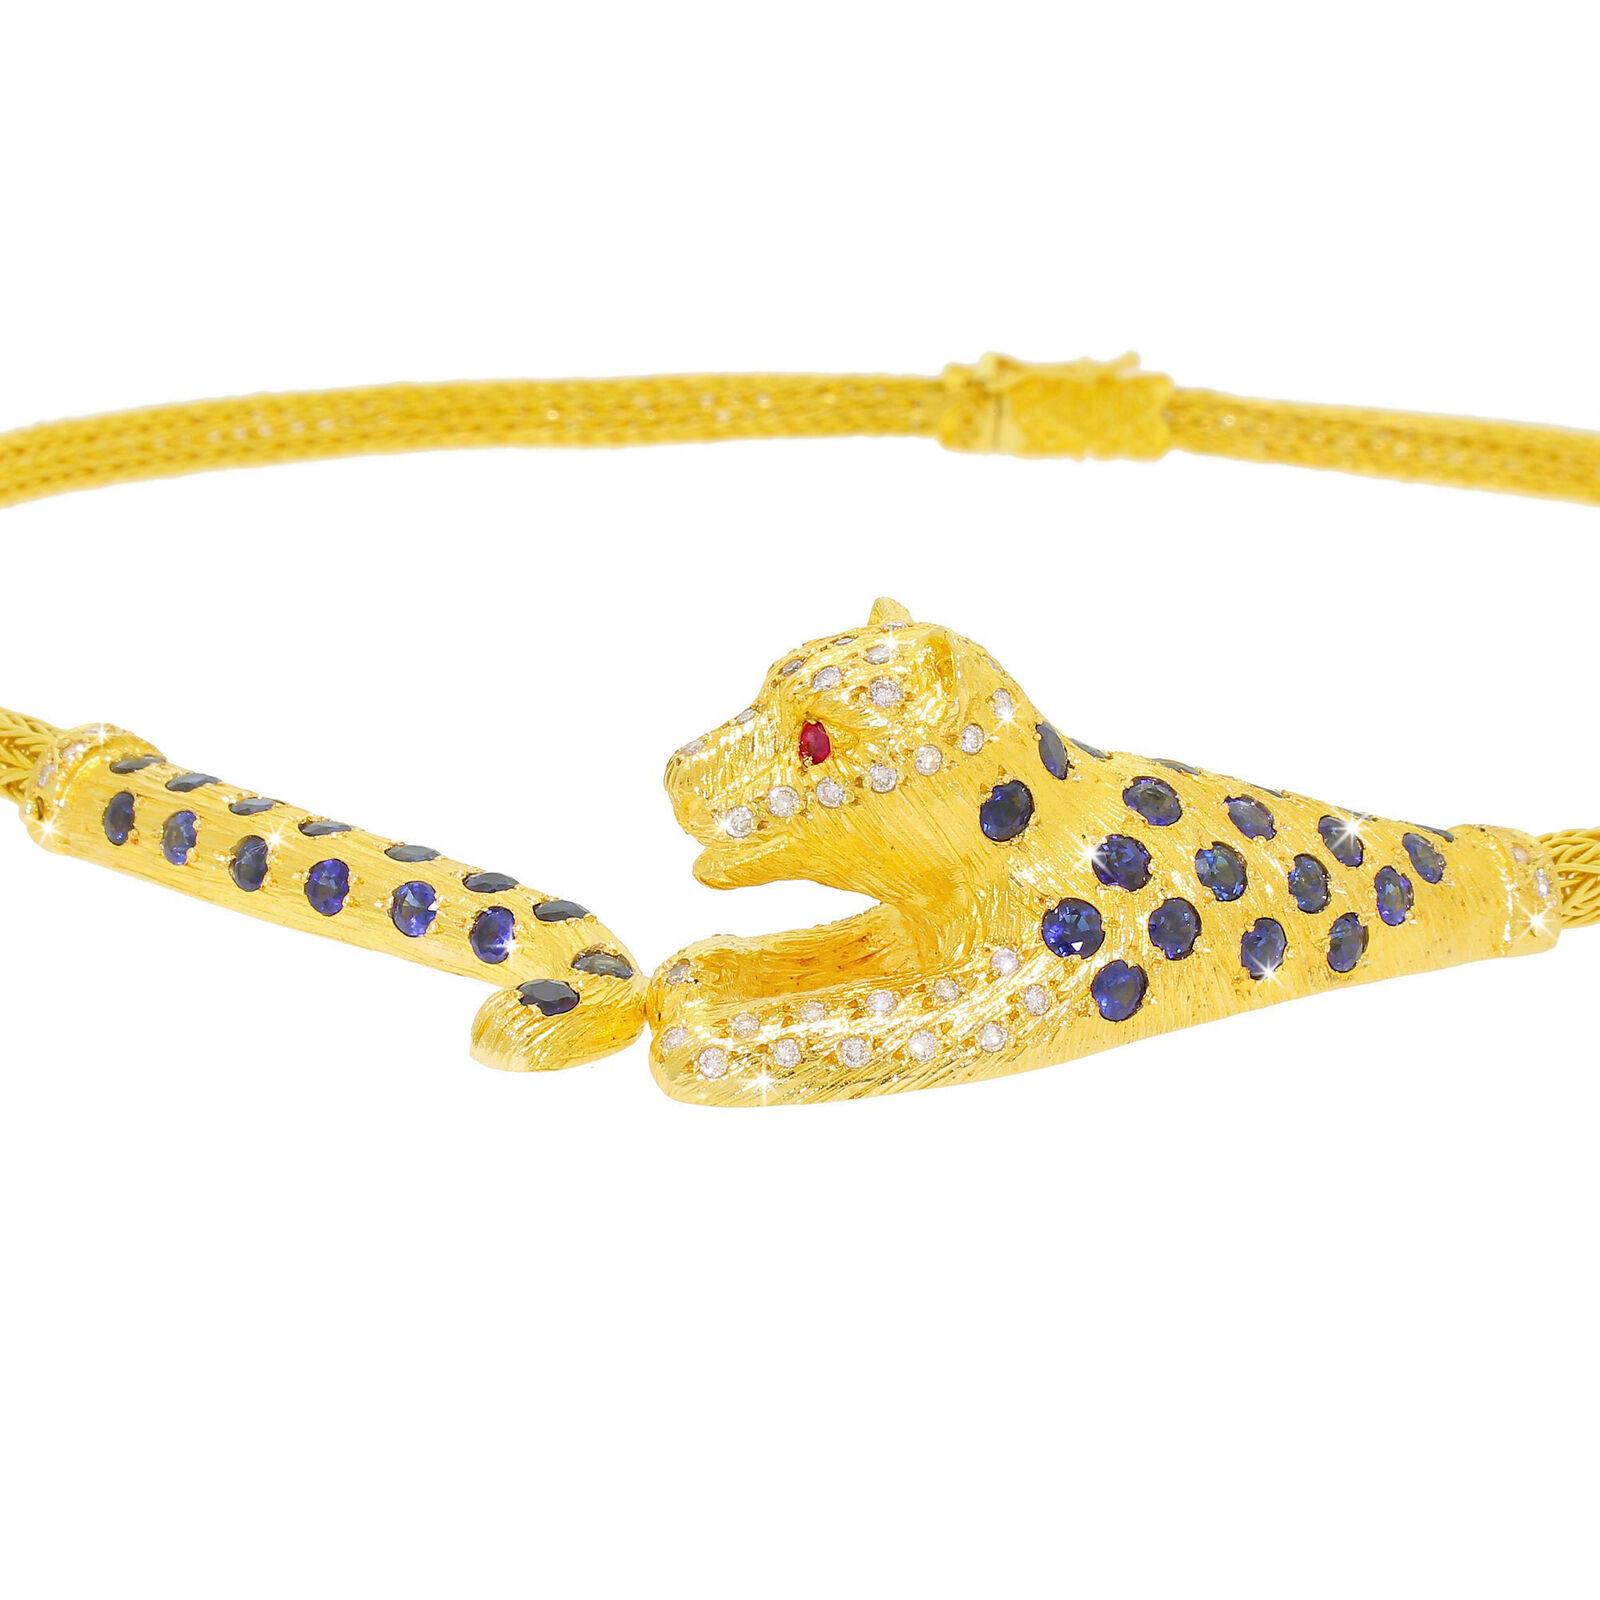 Details & Condition: We are proud to present this wonderful majestic and very well made panther / leopard necklace that has been sat in a vault for much of his life, as a result he is in excellent condition.
Rich 18k yellow gold is featured